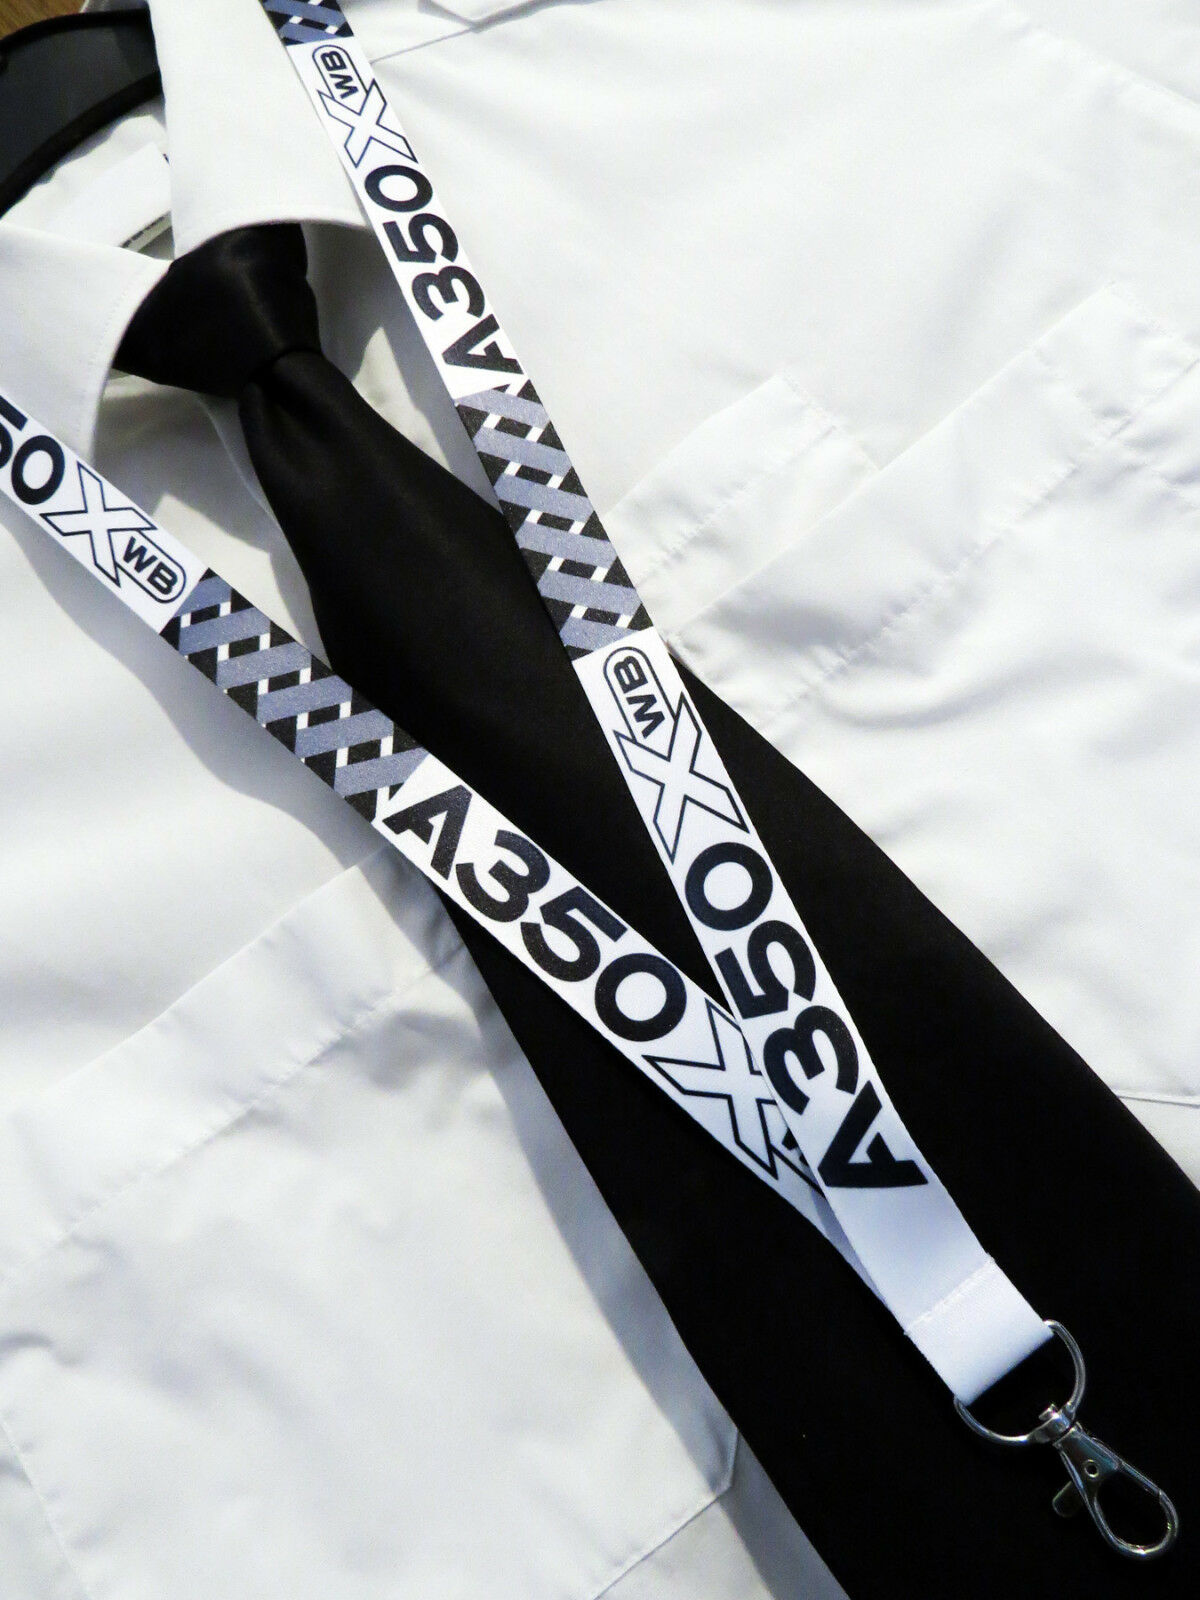 Airbus A350 Pilots Crew Carbon White Lanyard Neckstrap With Safety Clip Lanyard